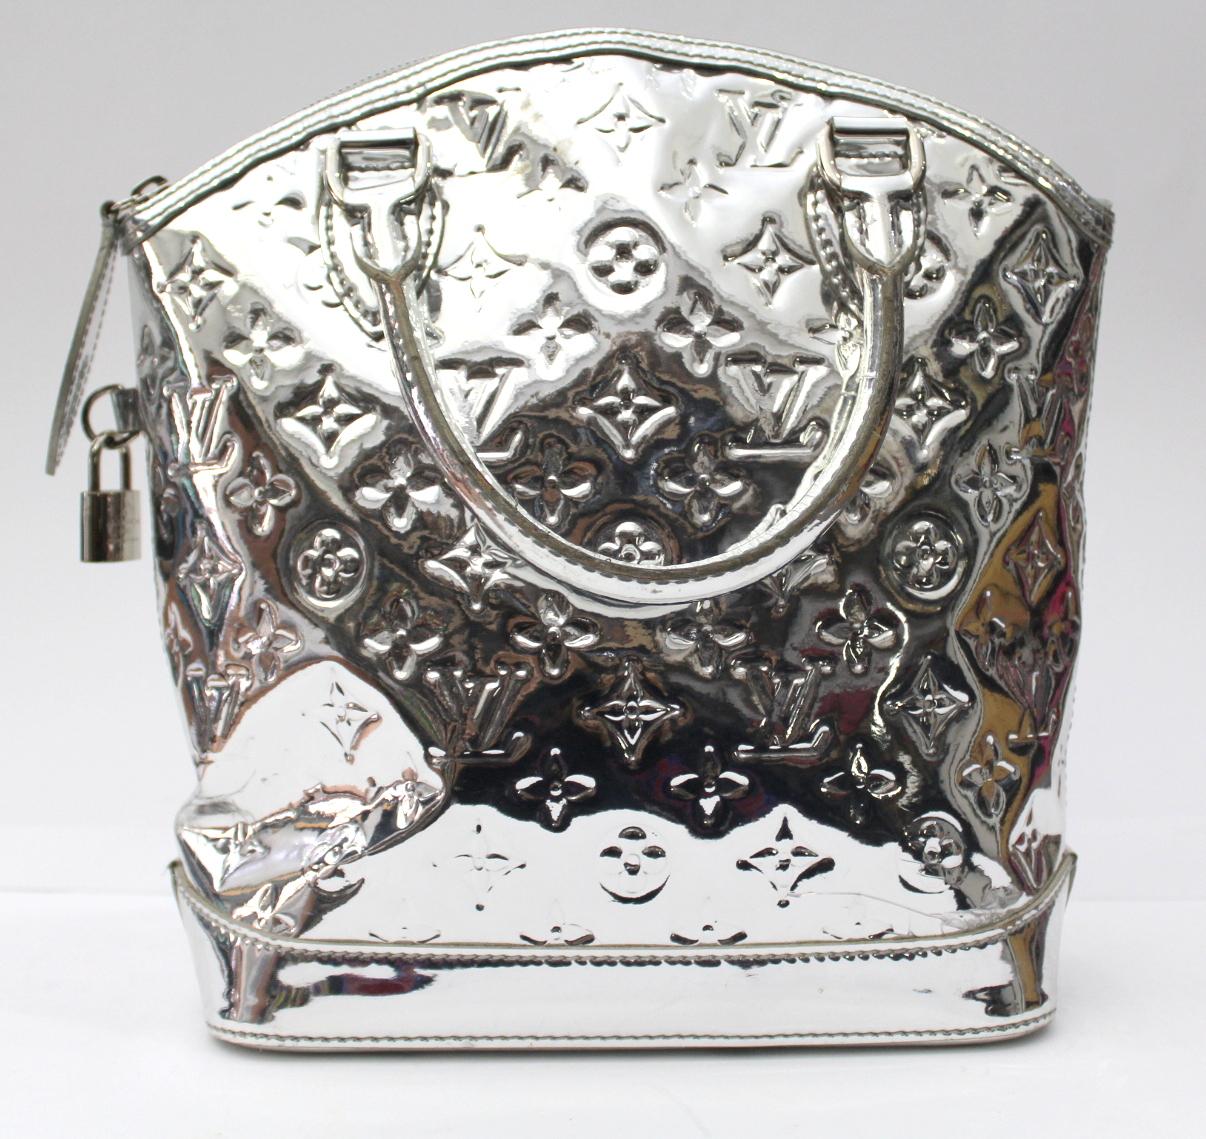 This Louis Vuitton Limited Edition Silver Monogram Miroir Lockit bag is a gorgeous and glamorous bag. This rare piece is made of ultra glossy monogrammed mirrored vinyl with patent leather trim and a lock to lock your precious objects. A definite